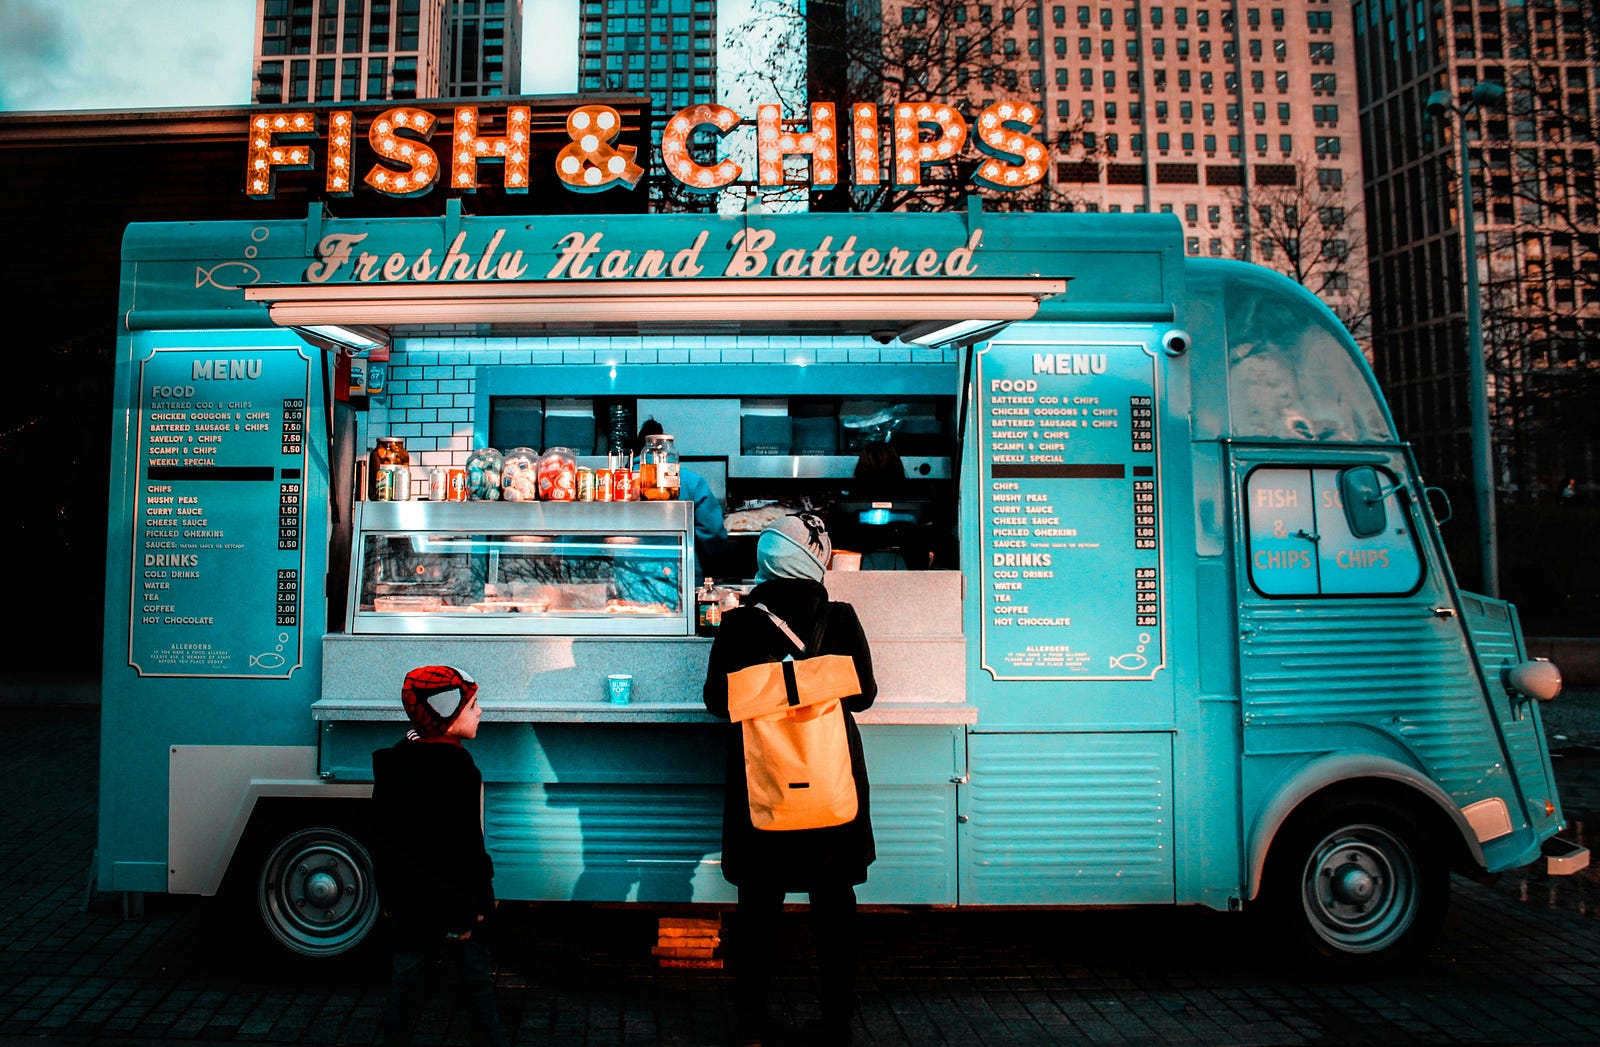 A fish and chips blue-colored food truck.